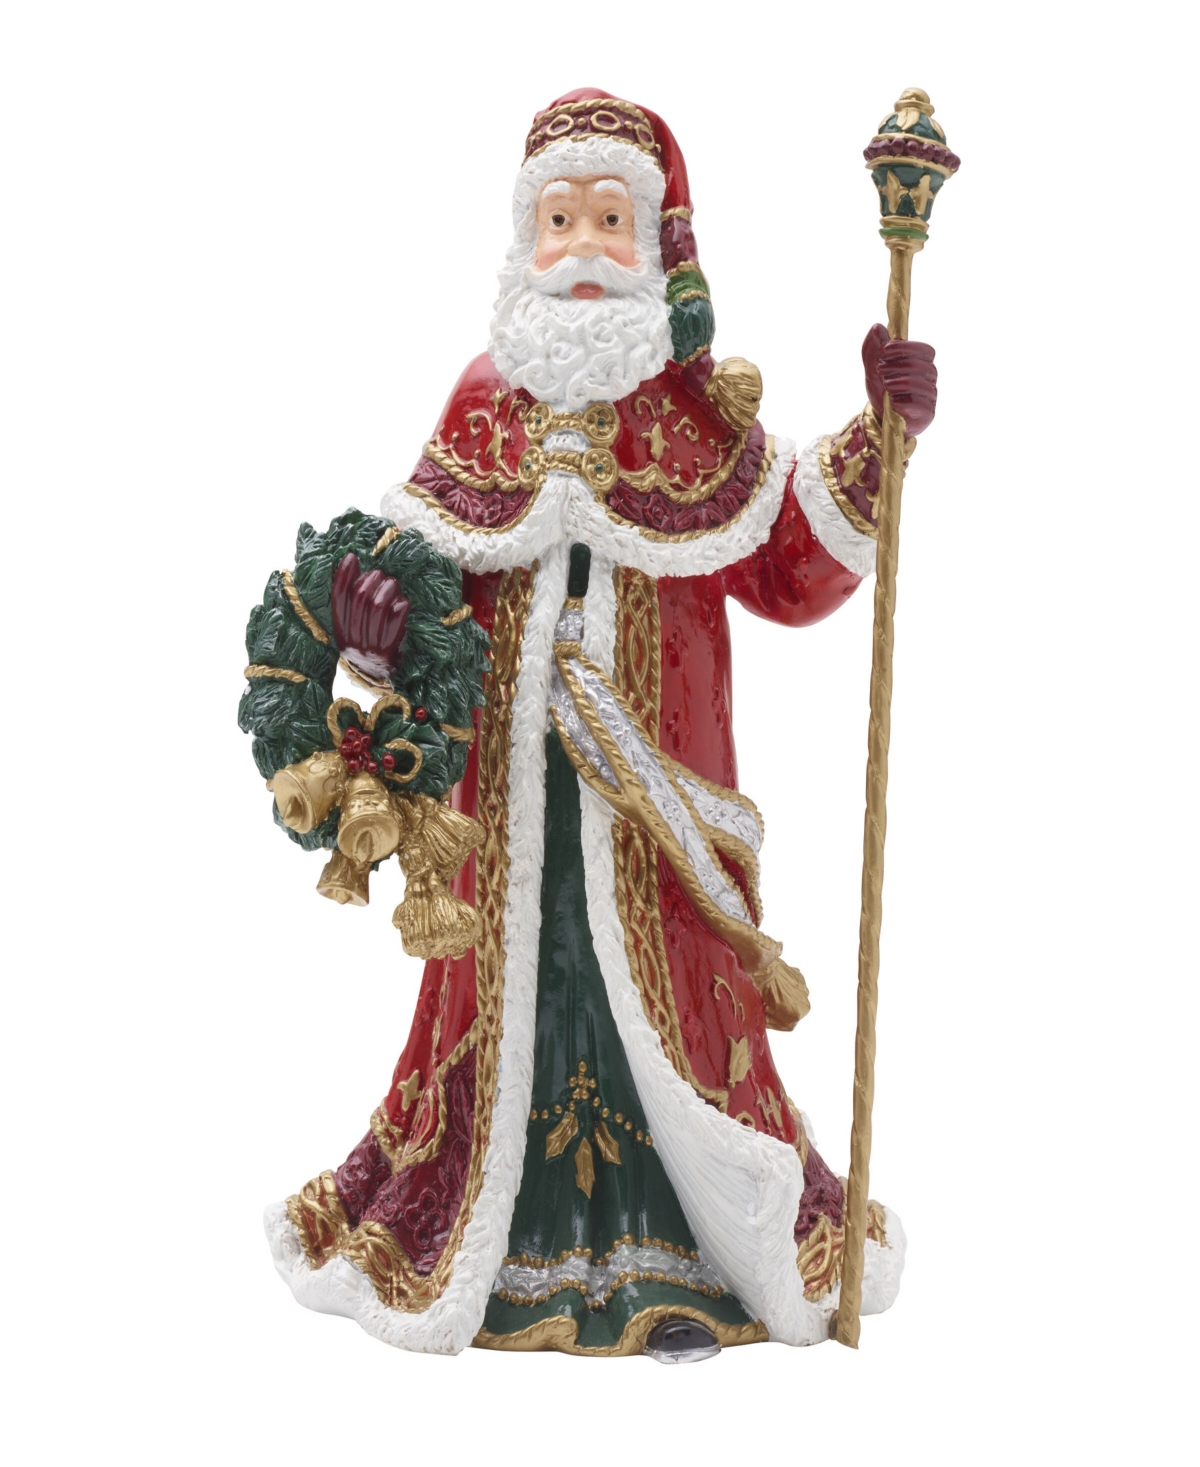 Fitz And Floyd Noel Holiday Musical Santa Figurine, 11-inch In Assorted